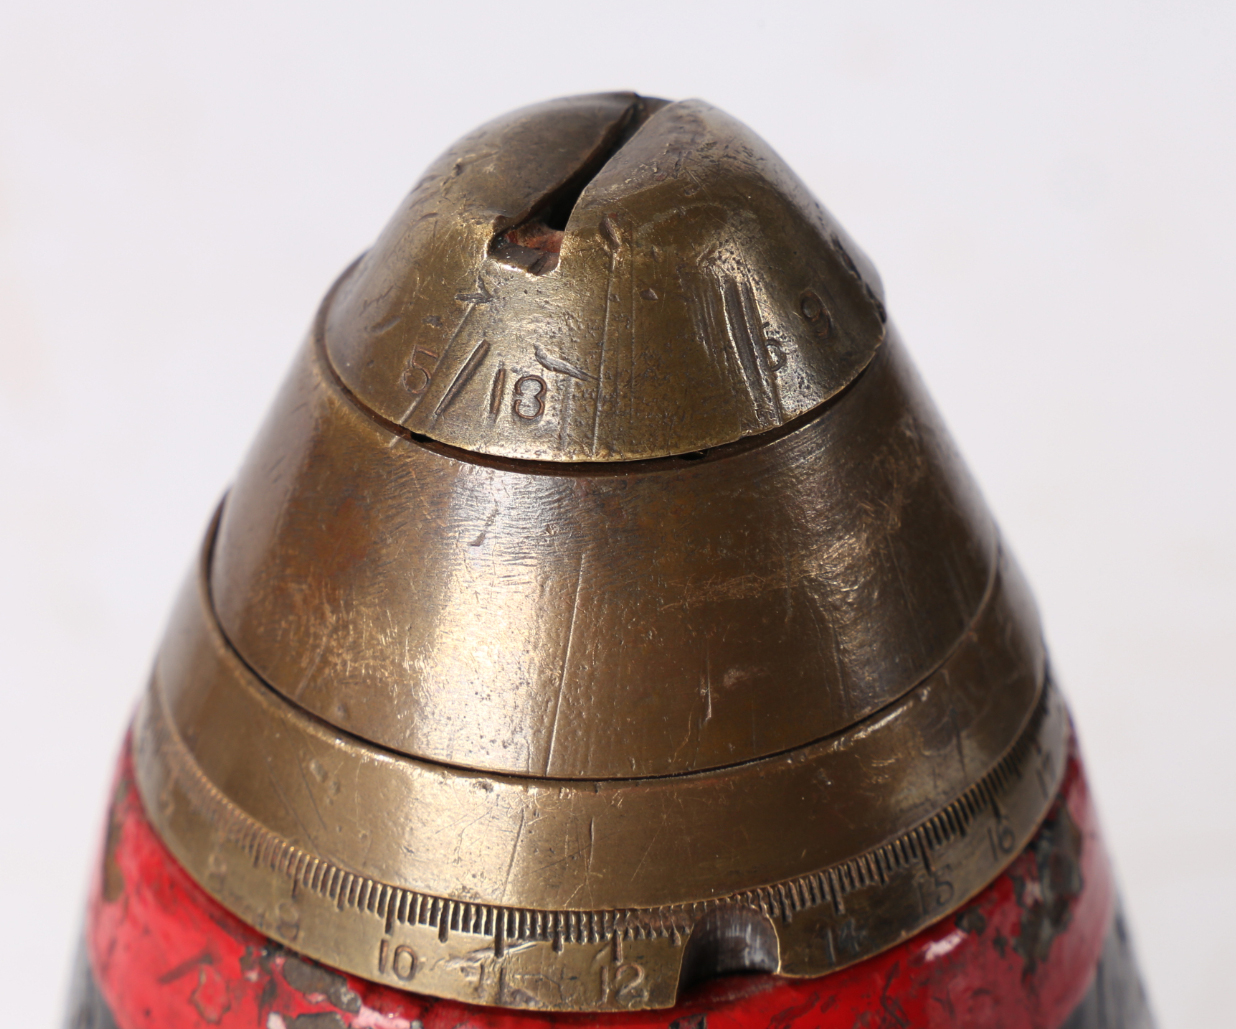 First World War British large calibre shell projectile with No.94 Fuze dated 5/18, inert - Image 6 of 6